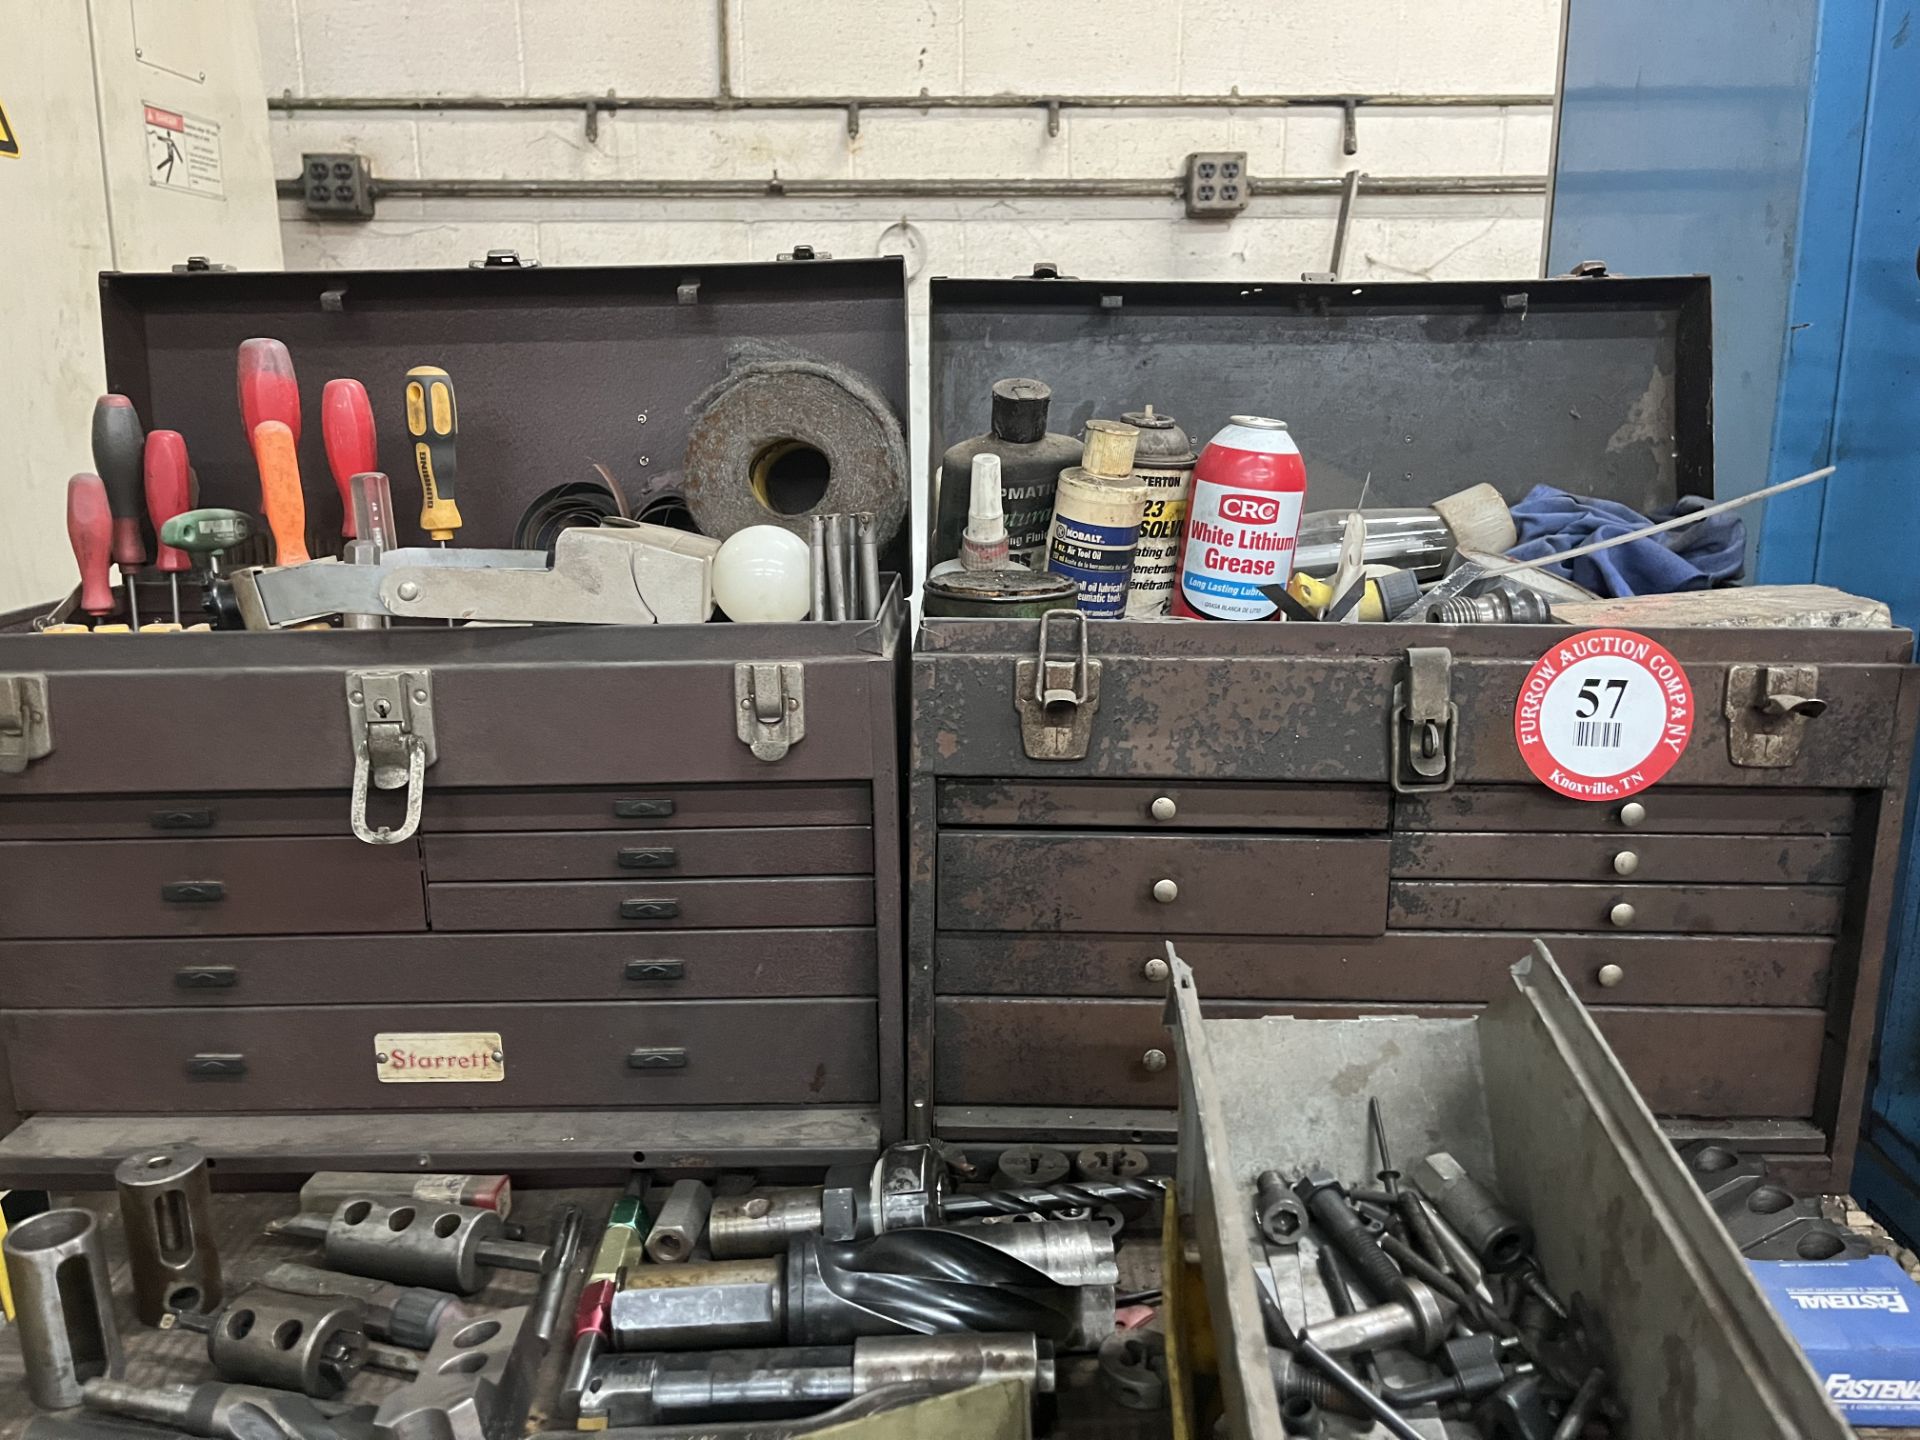 (2) Metal Tool Boxes with Assorted Tooling, Drill Bits, Mill Cutters, Taps, Screwdrivers, etc.